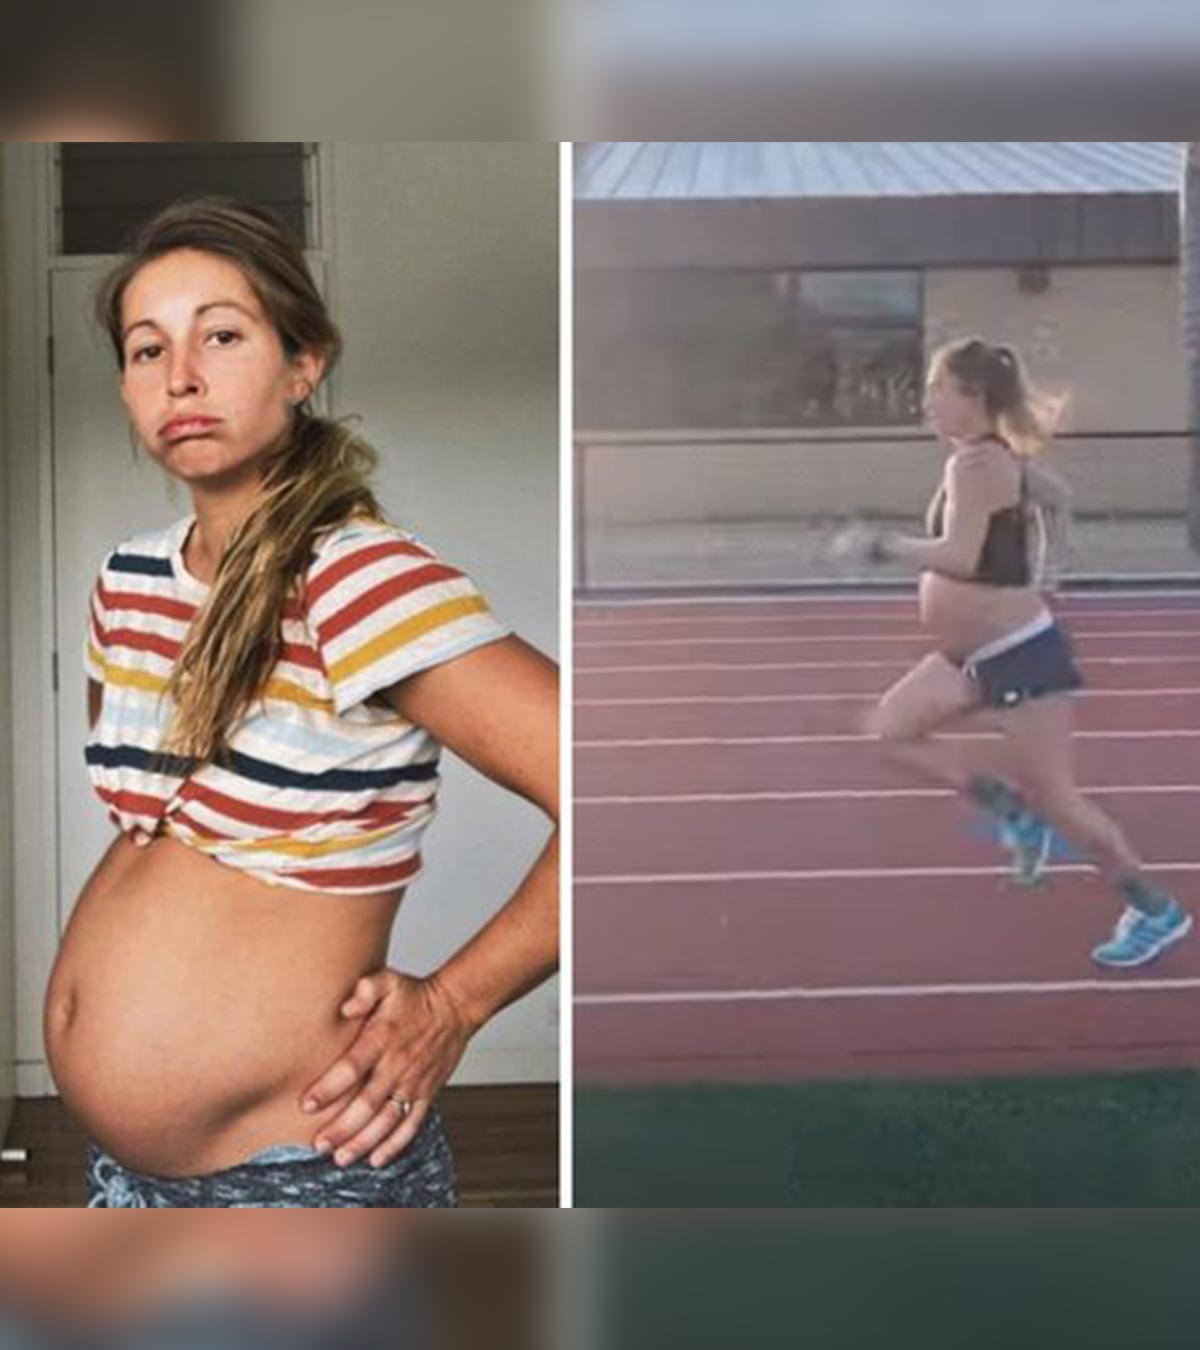 Woman Runs 1.6 Km With 9 Month Baby Bump In Just 5 Minutes, 25 Seconds 